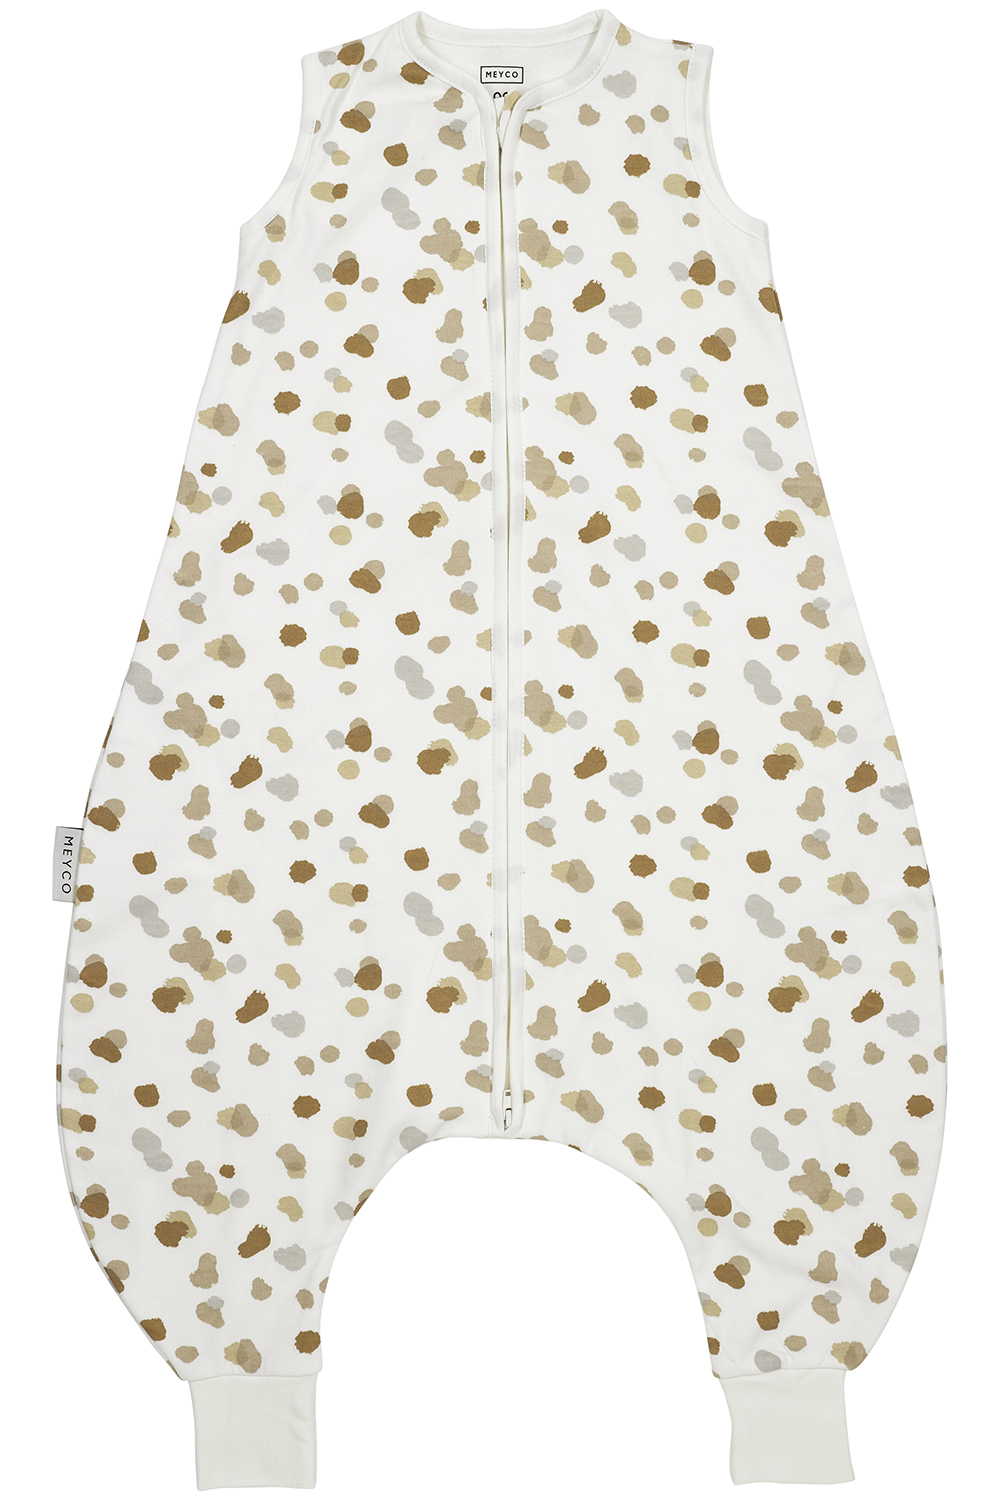 Baby sommer Schlafoverall Jumper Stains - sand - 92cm